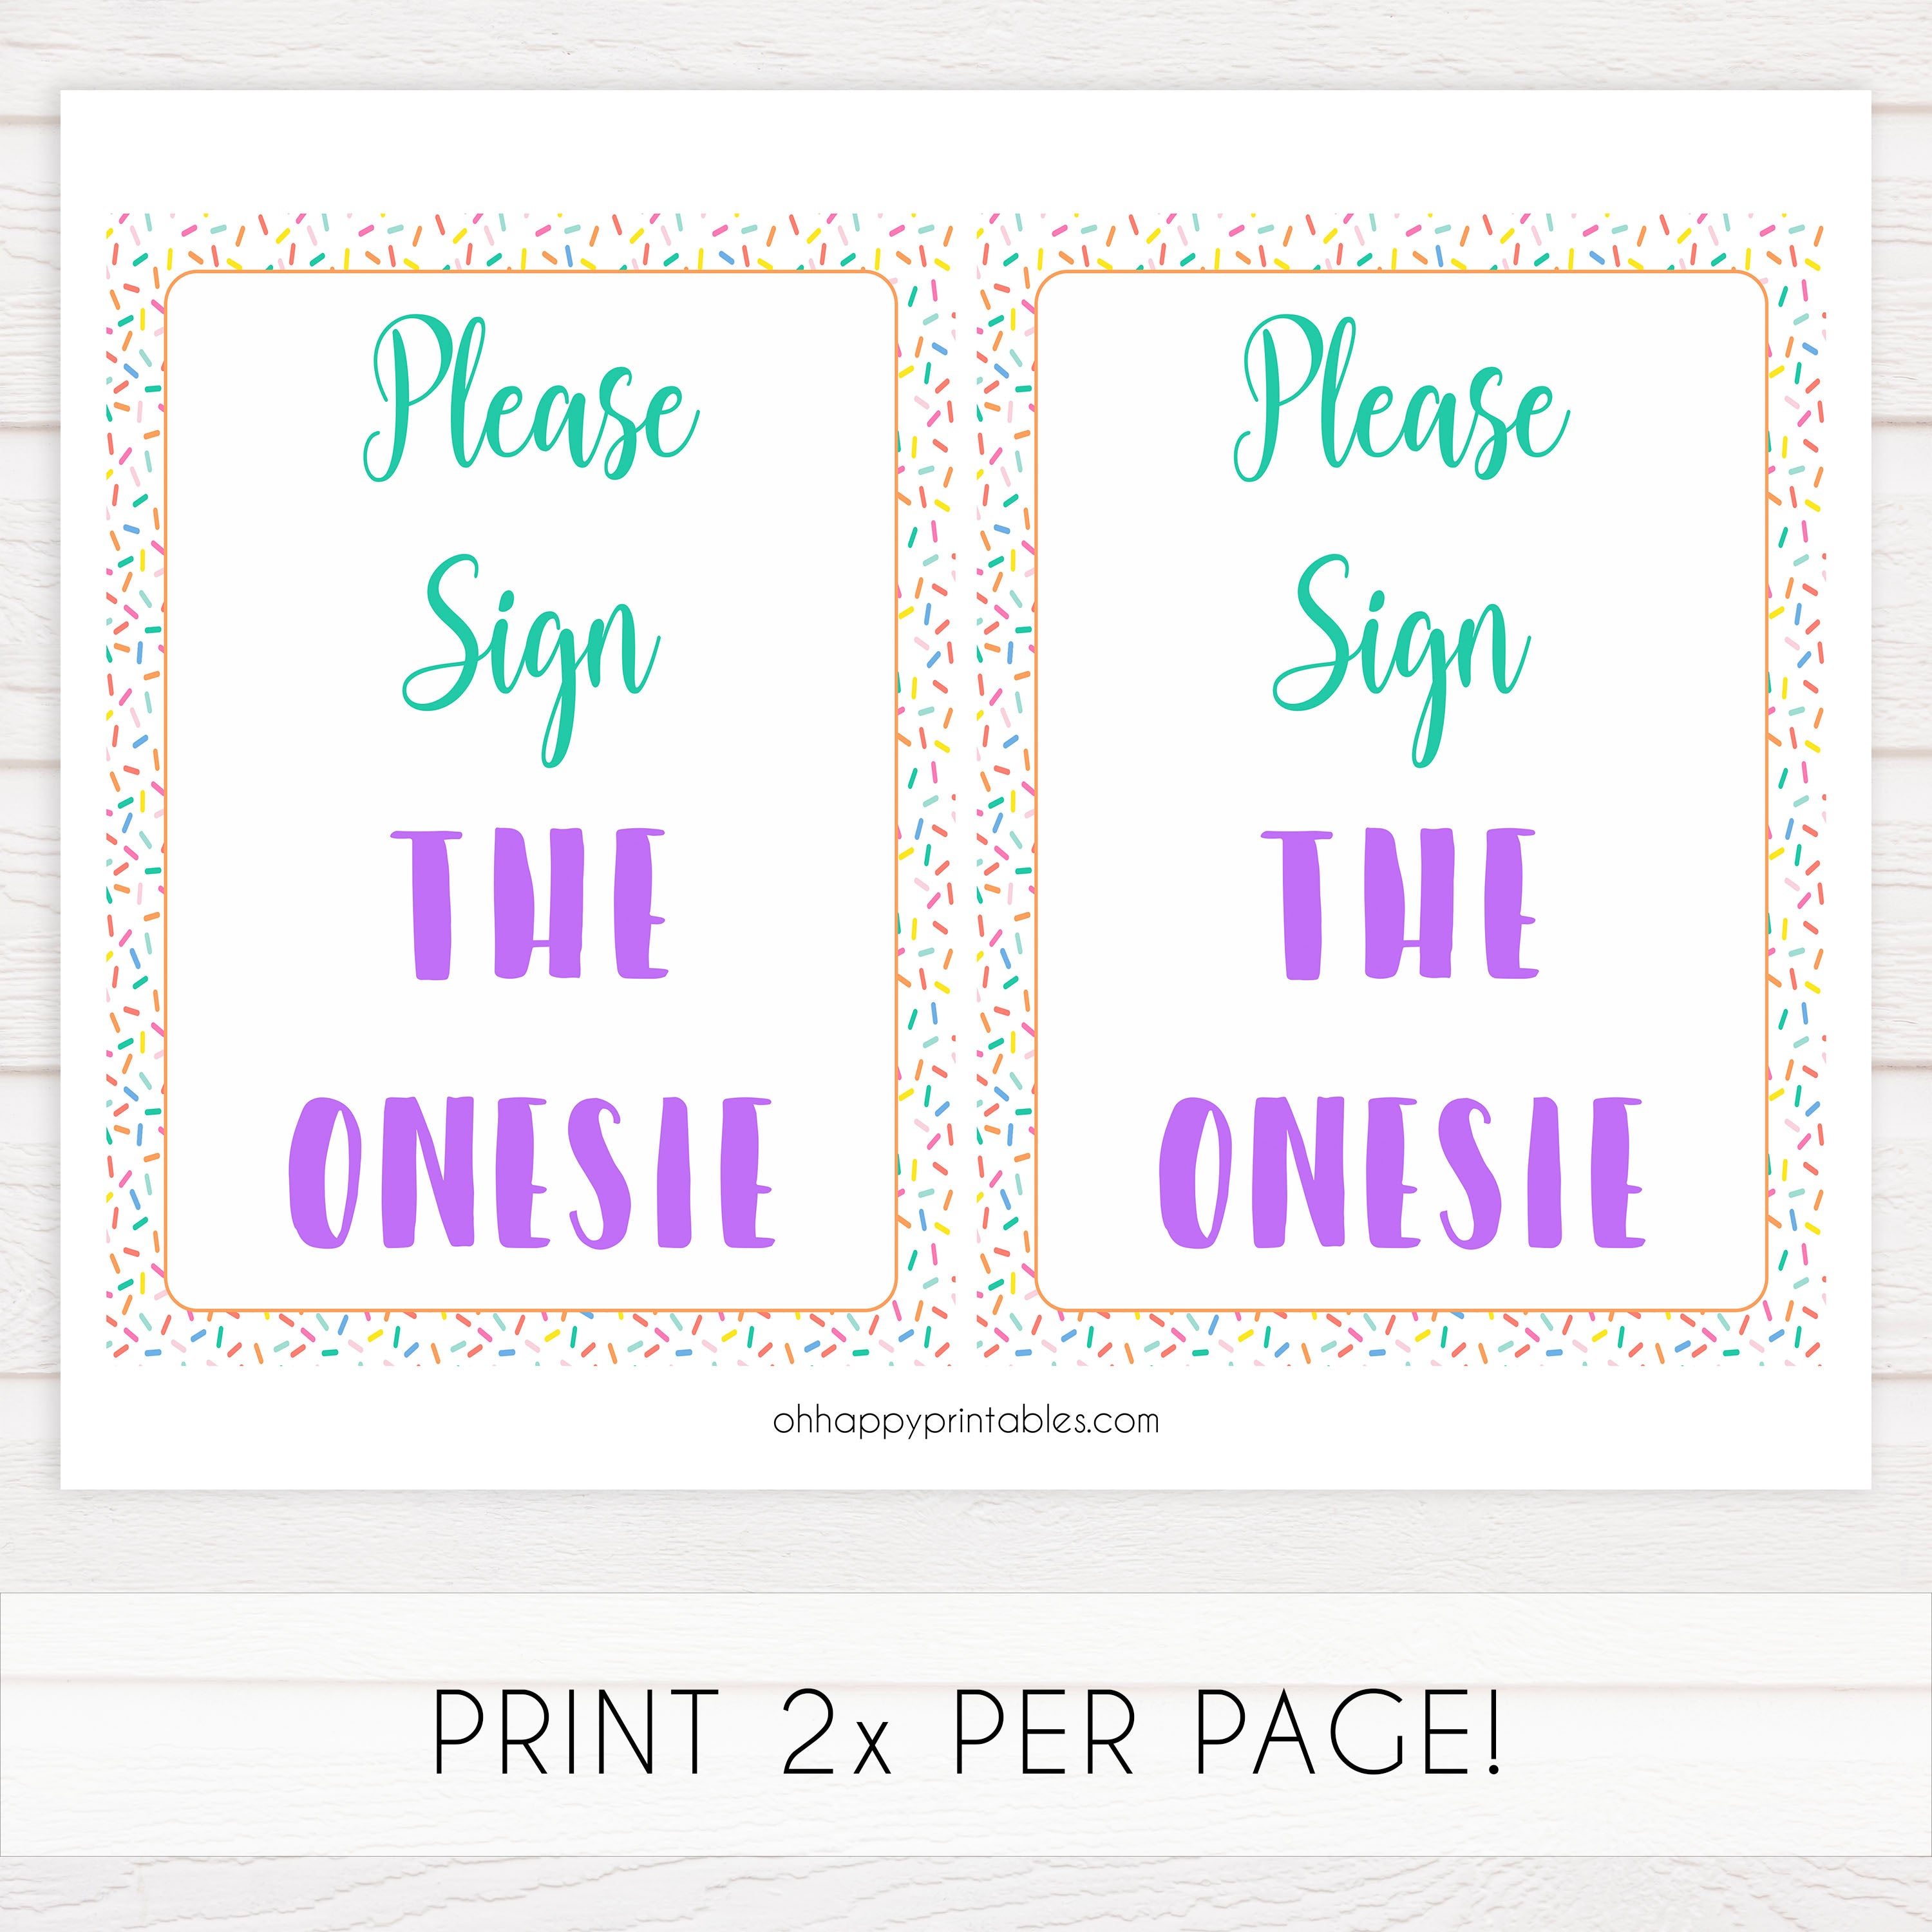 Please sign the onesie, Printable baby shower games, baby sprinkle fun baby games, baby shower games, fun baby shower ideas, top baby shower ideas, sprinkle shower baby shower, friends baby shower ideas